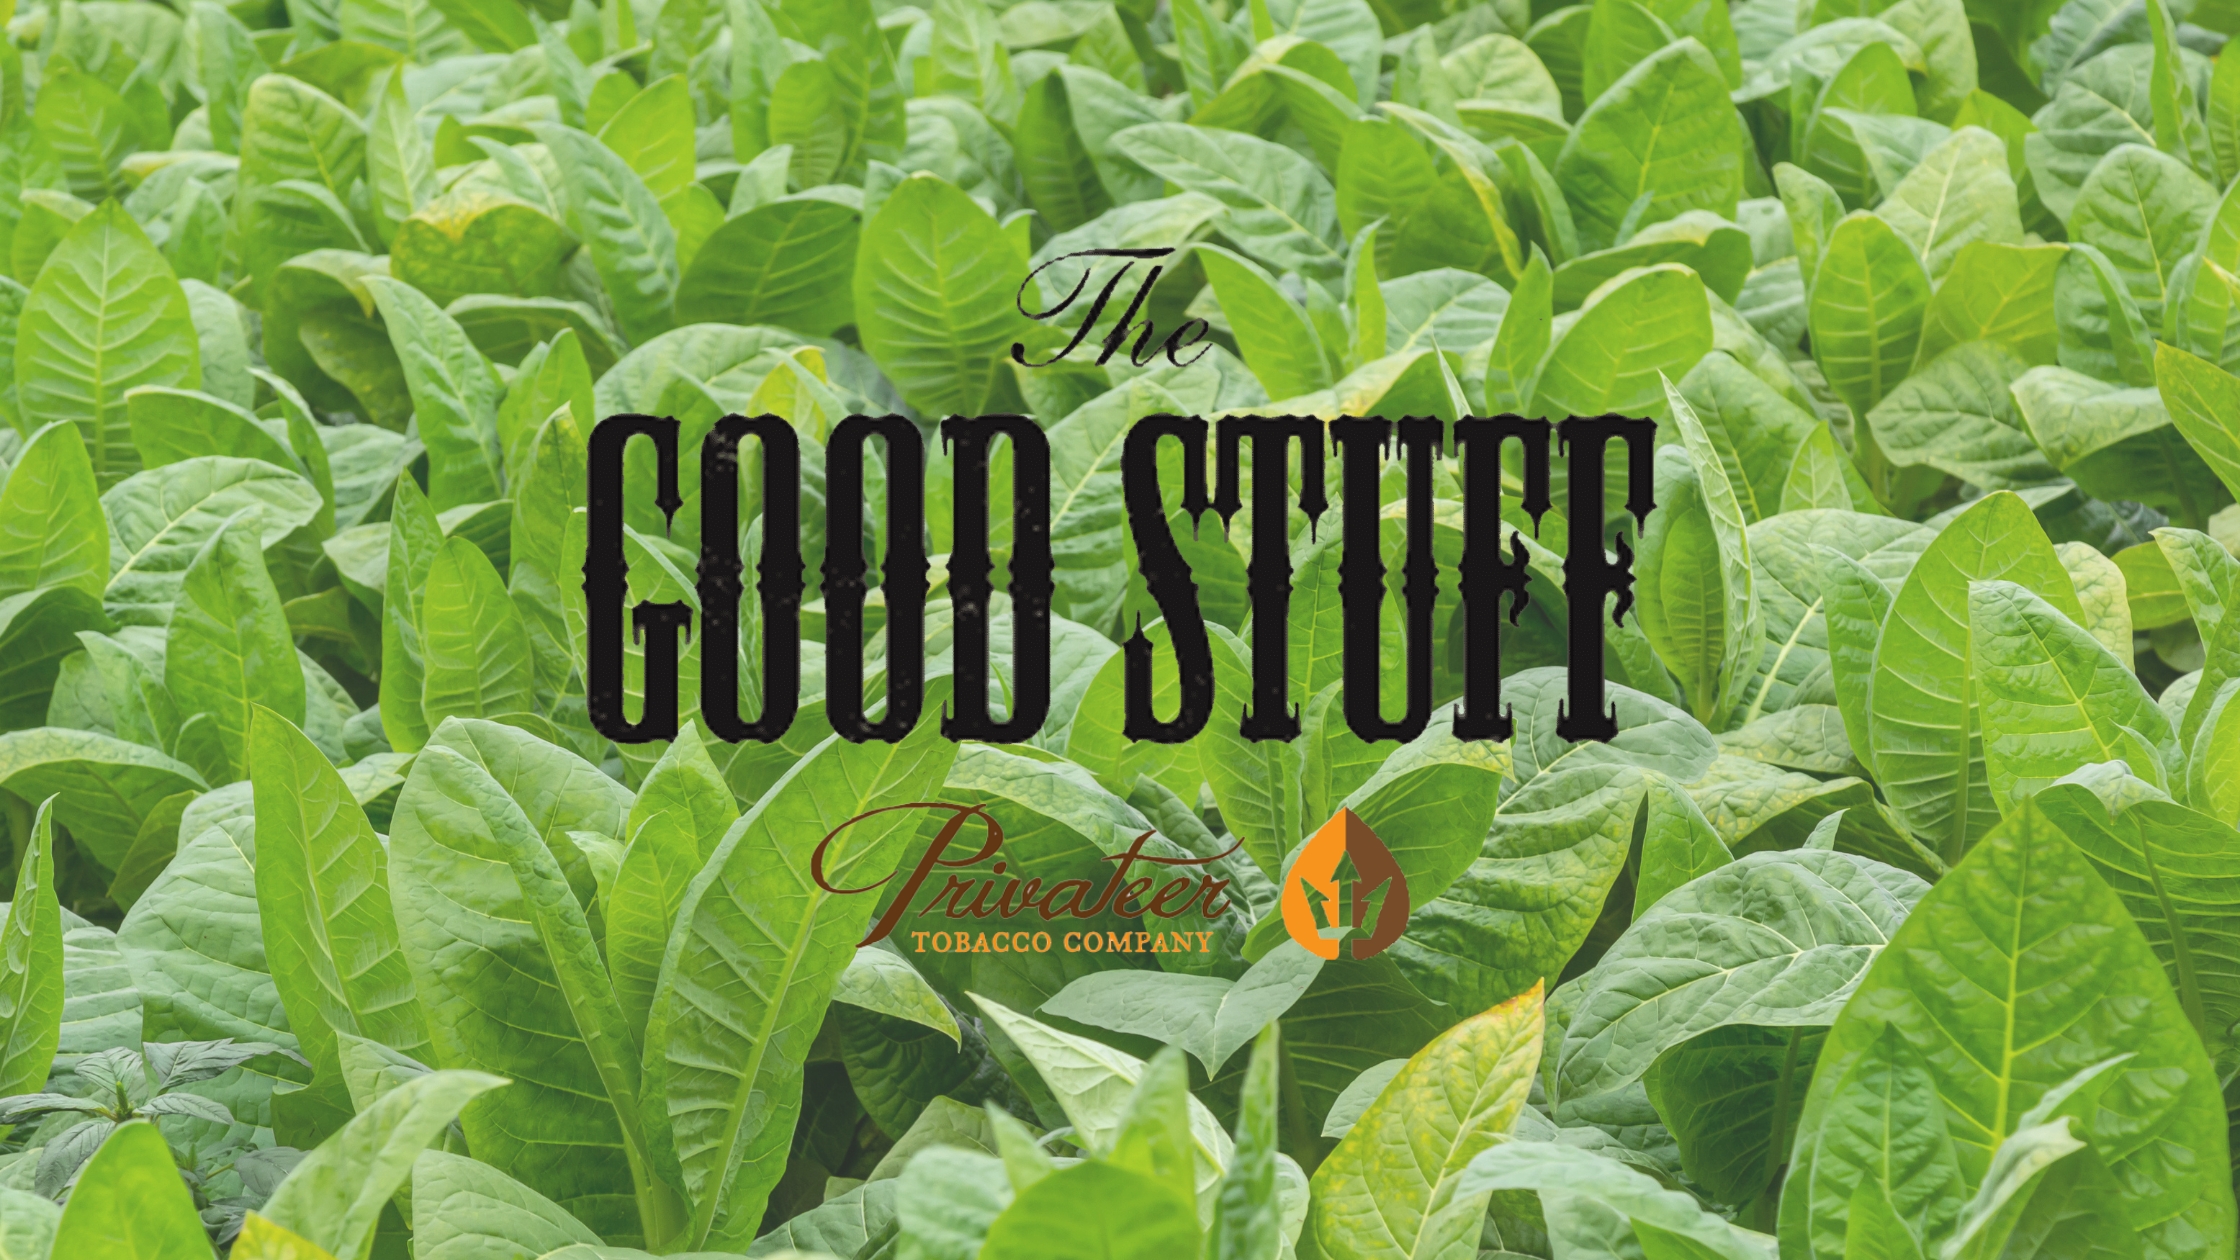 Now Discover Everything There’s to Know About The Good Stuff Tobacco